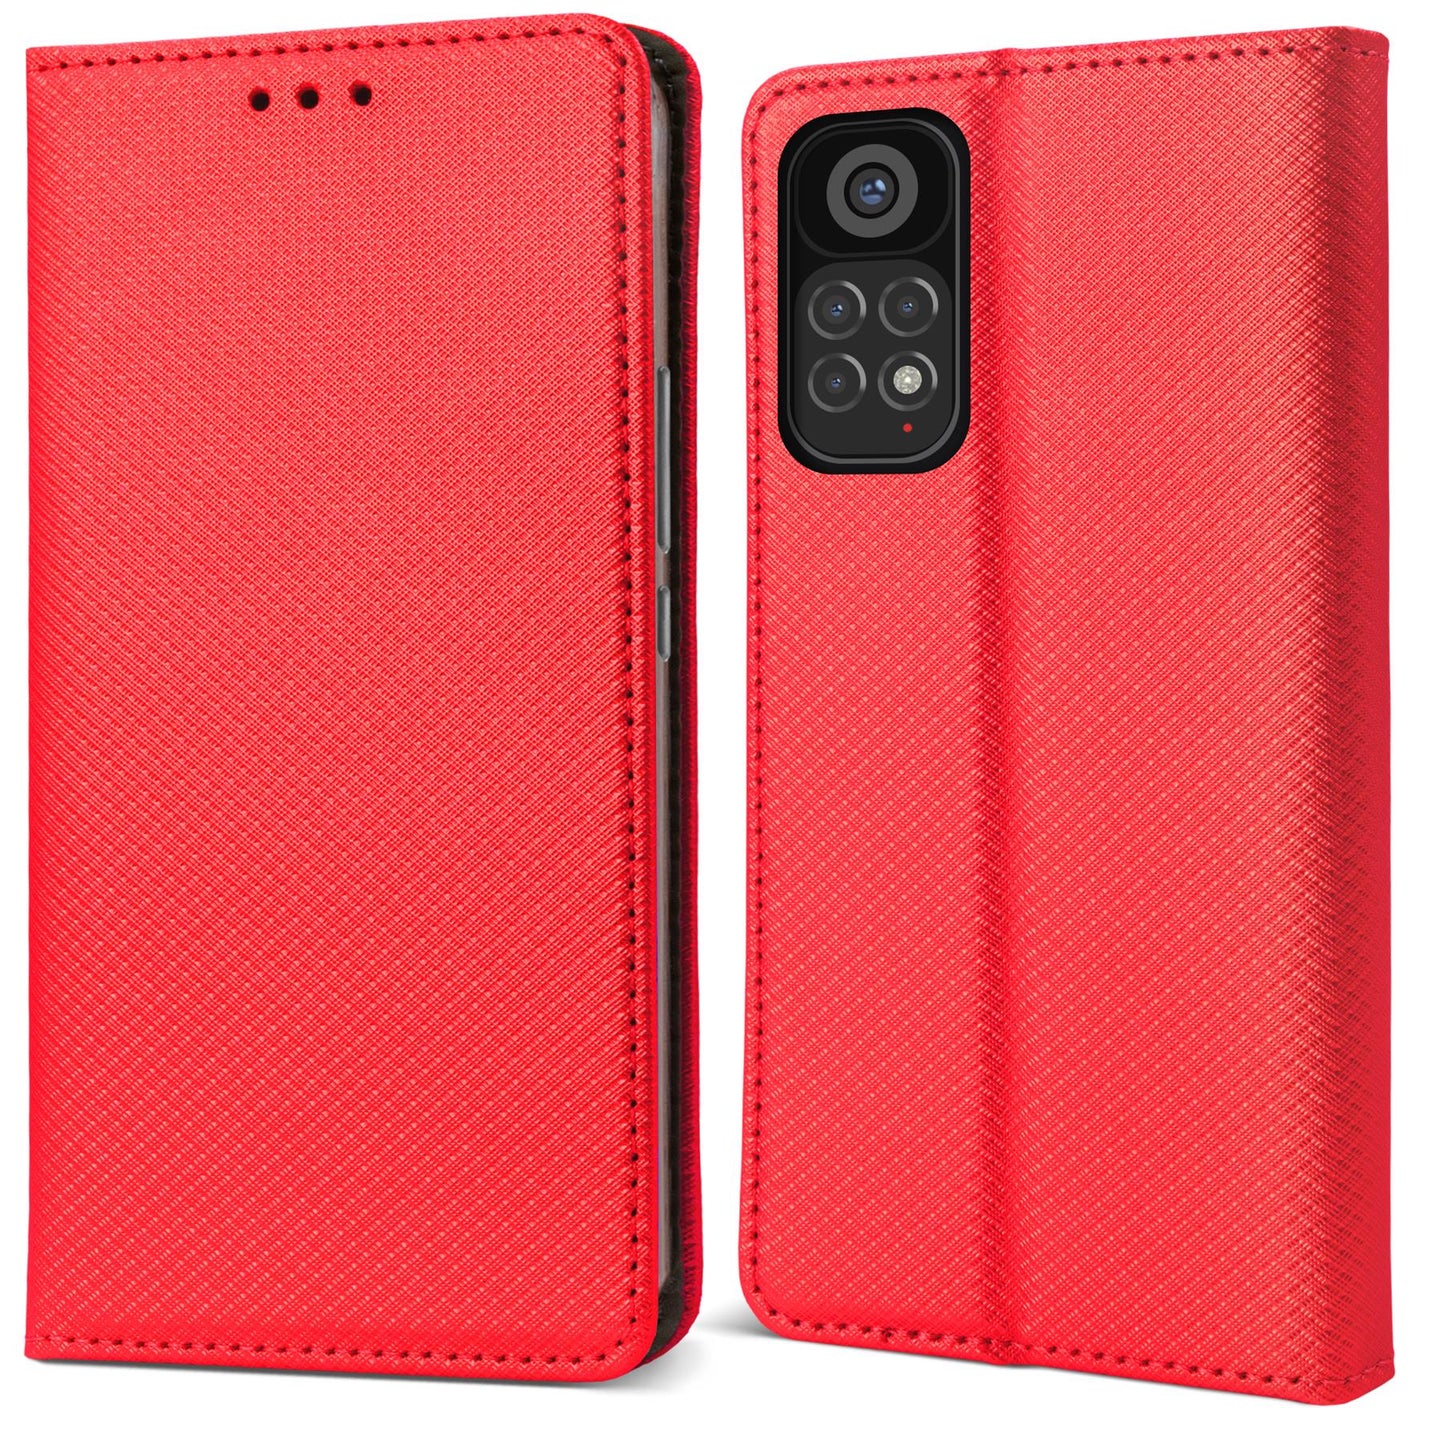 Moozy Case Flip Cover for Xiaomi Redmi Note 11 Pro 5G/4G, Red - Smart Magnetic Flip Case Flip Folio Wallet Case with Card Holder and Stand, Credit Card Slots, Kickstand Function